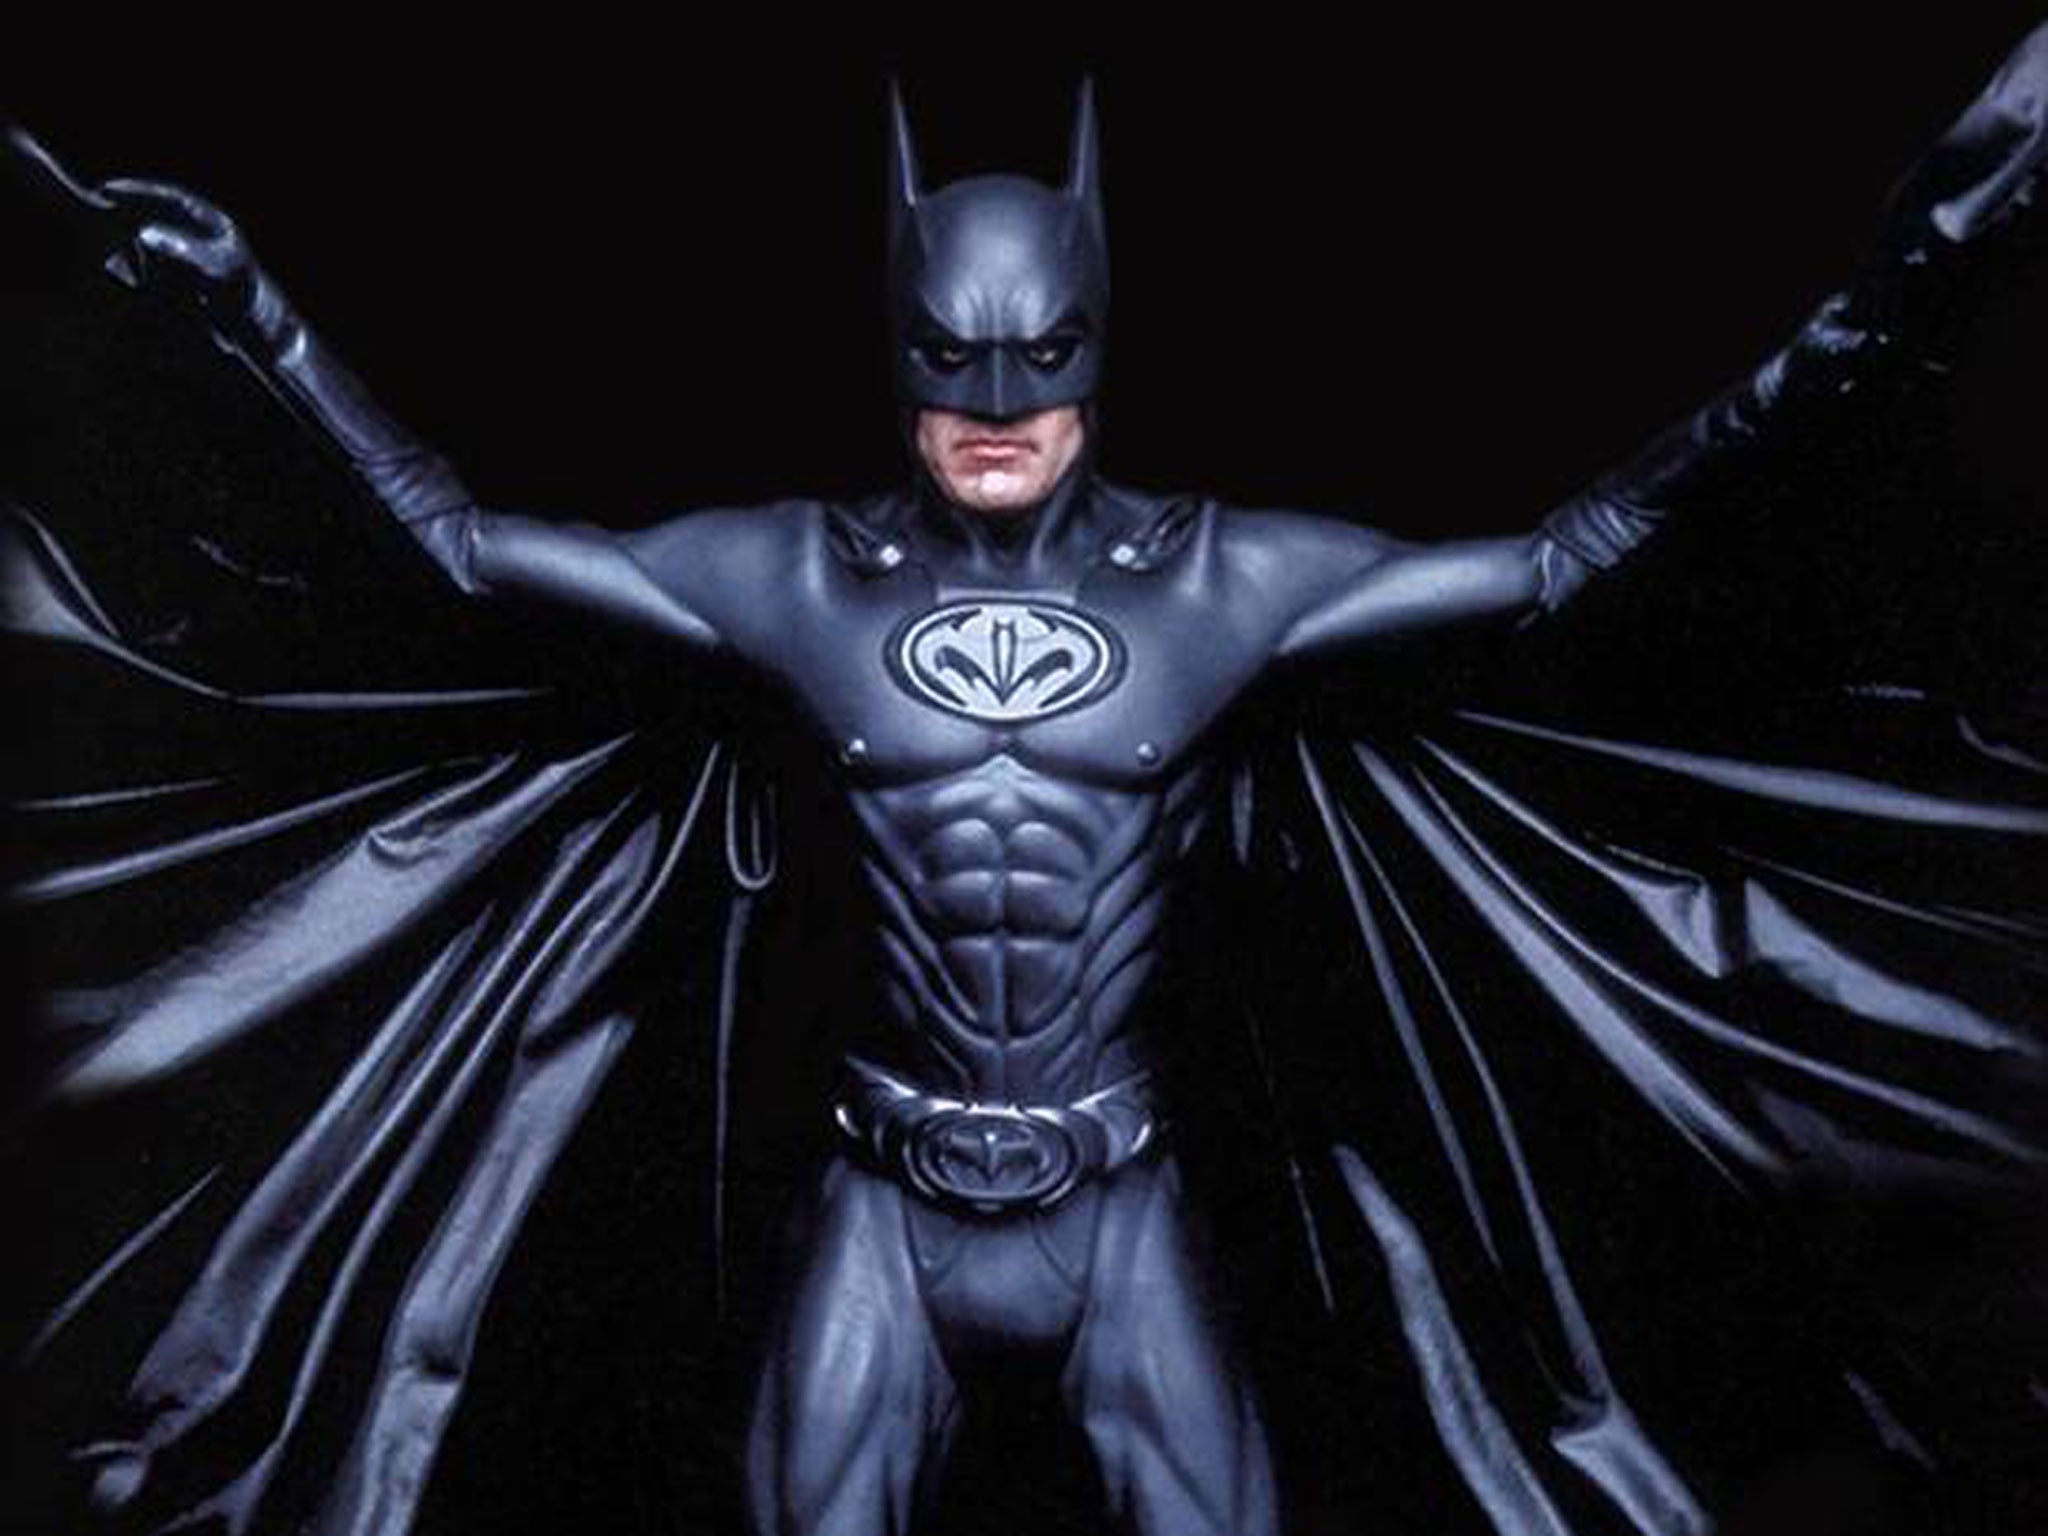 George Clooney was cast in 1997's Batman & Robin when his career was only just taking off. The film was a shocker, not least for the famous 'bat nipples' and general camp style - it is still laughed at today. Clooney has since called the movie 'a waste of